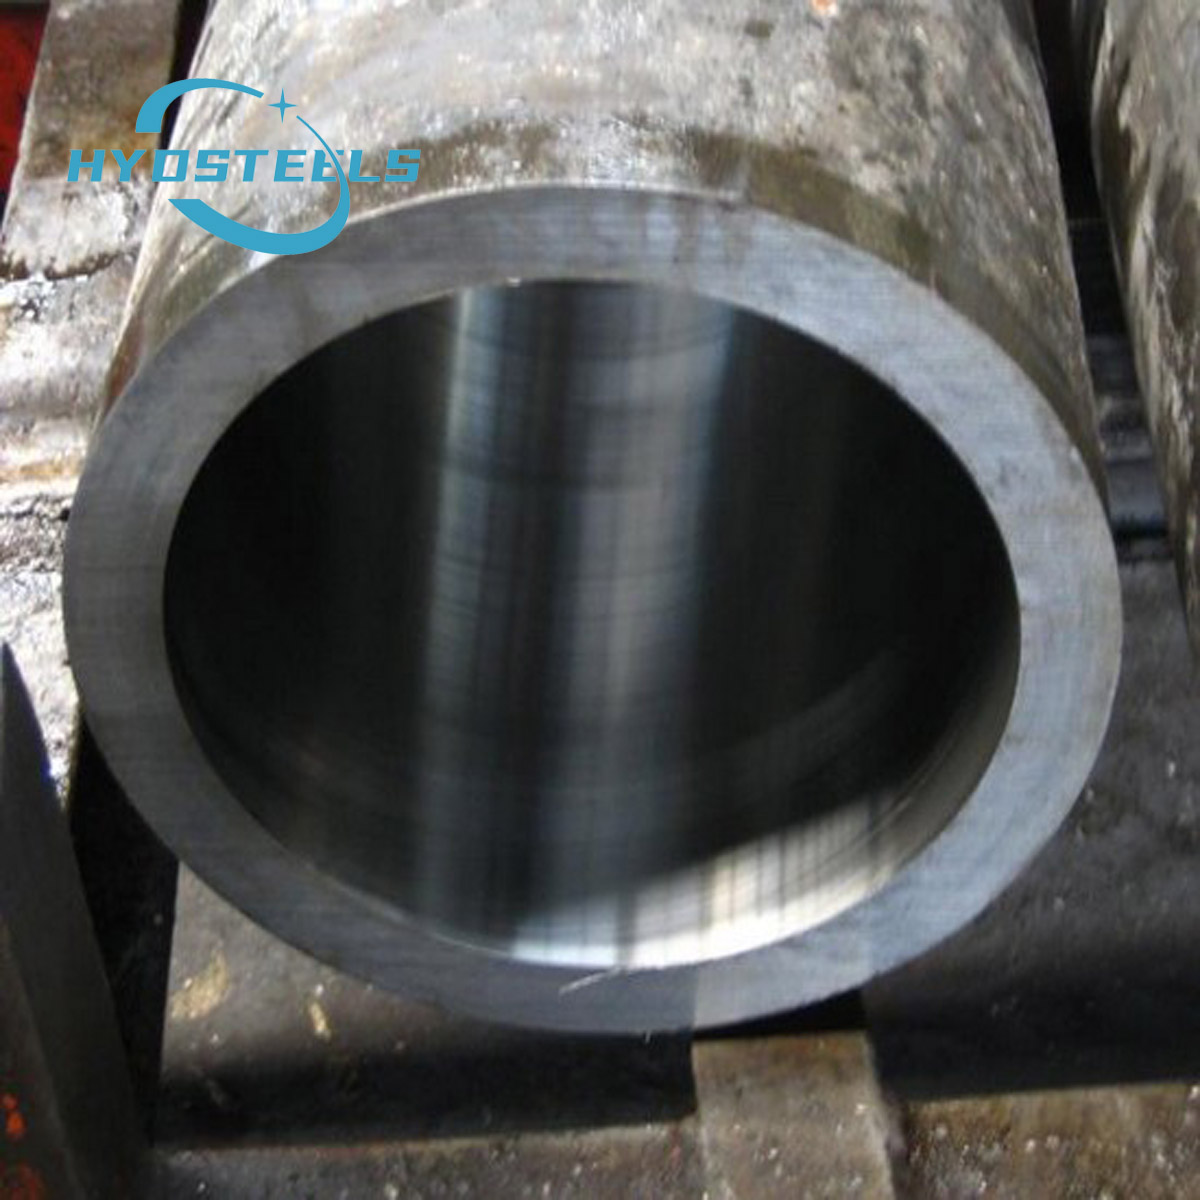 High Quality Seamless Steel Pipe ST52 Cold Drawn Seamless Tube